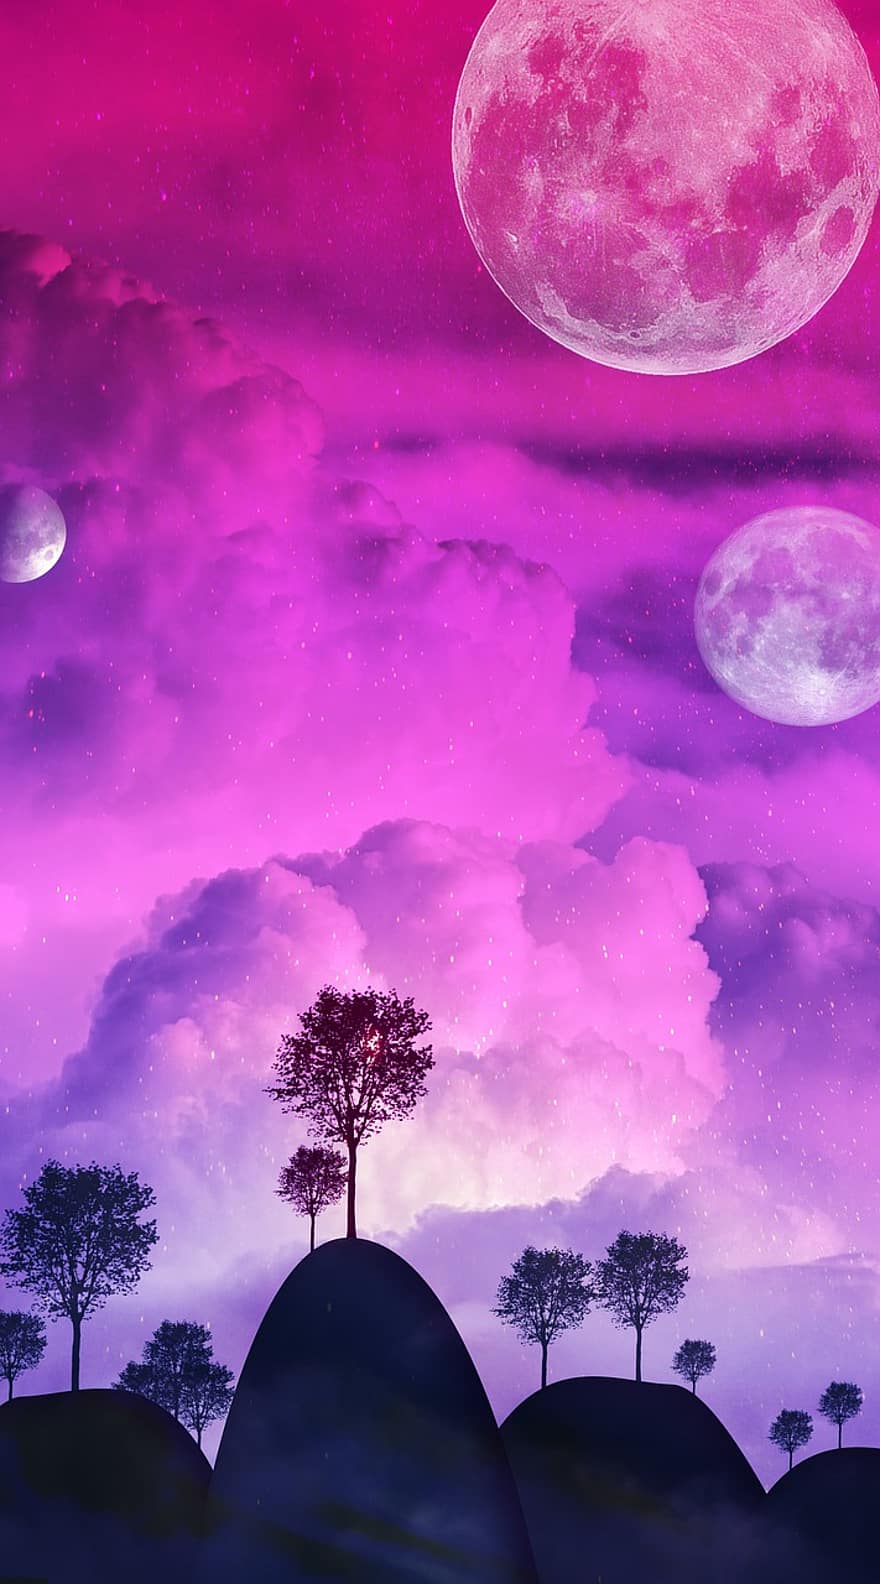 Planet, Moon, Space, Clouds, Universe, night, star, galaxy, tree, backgrounds, astronomy